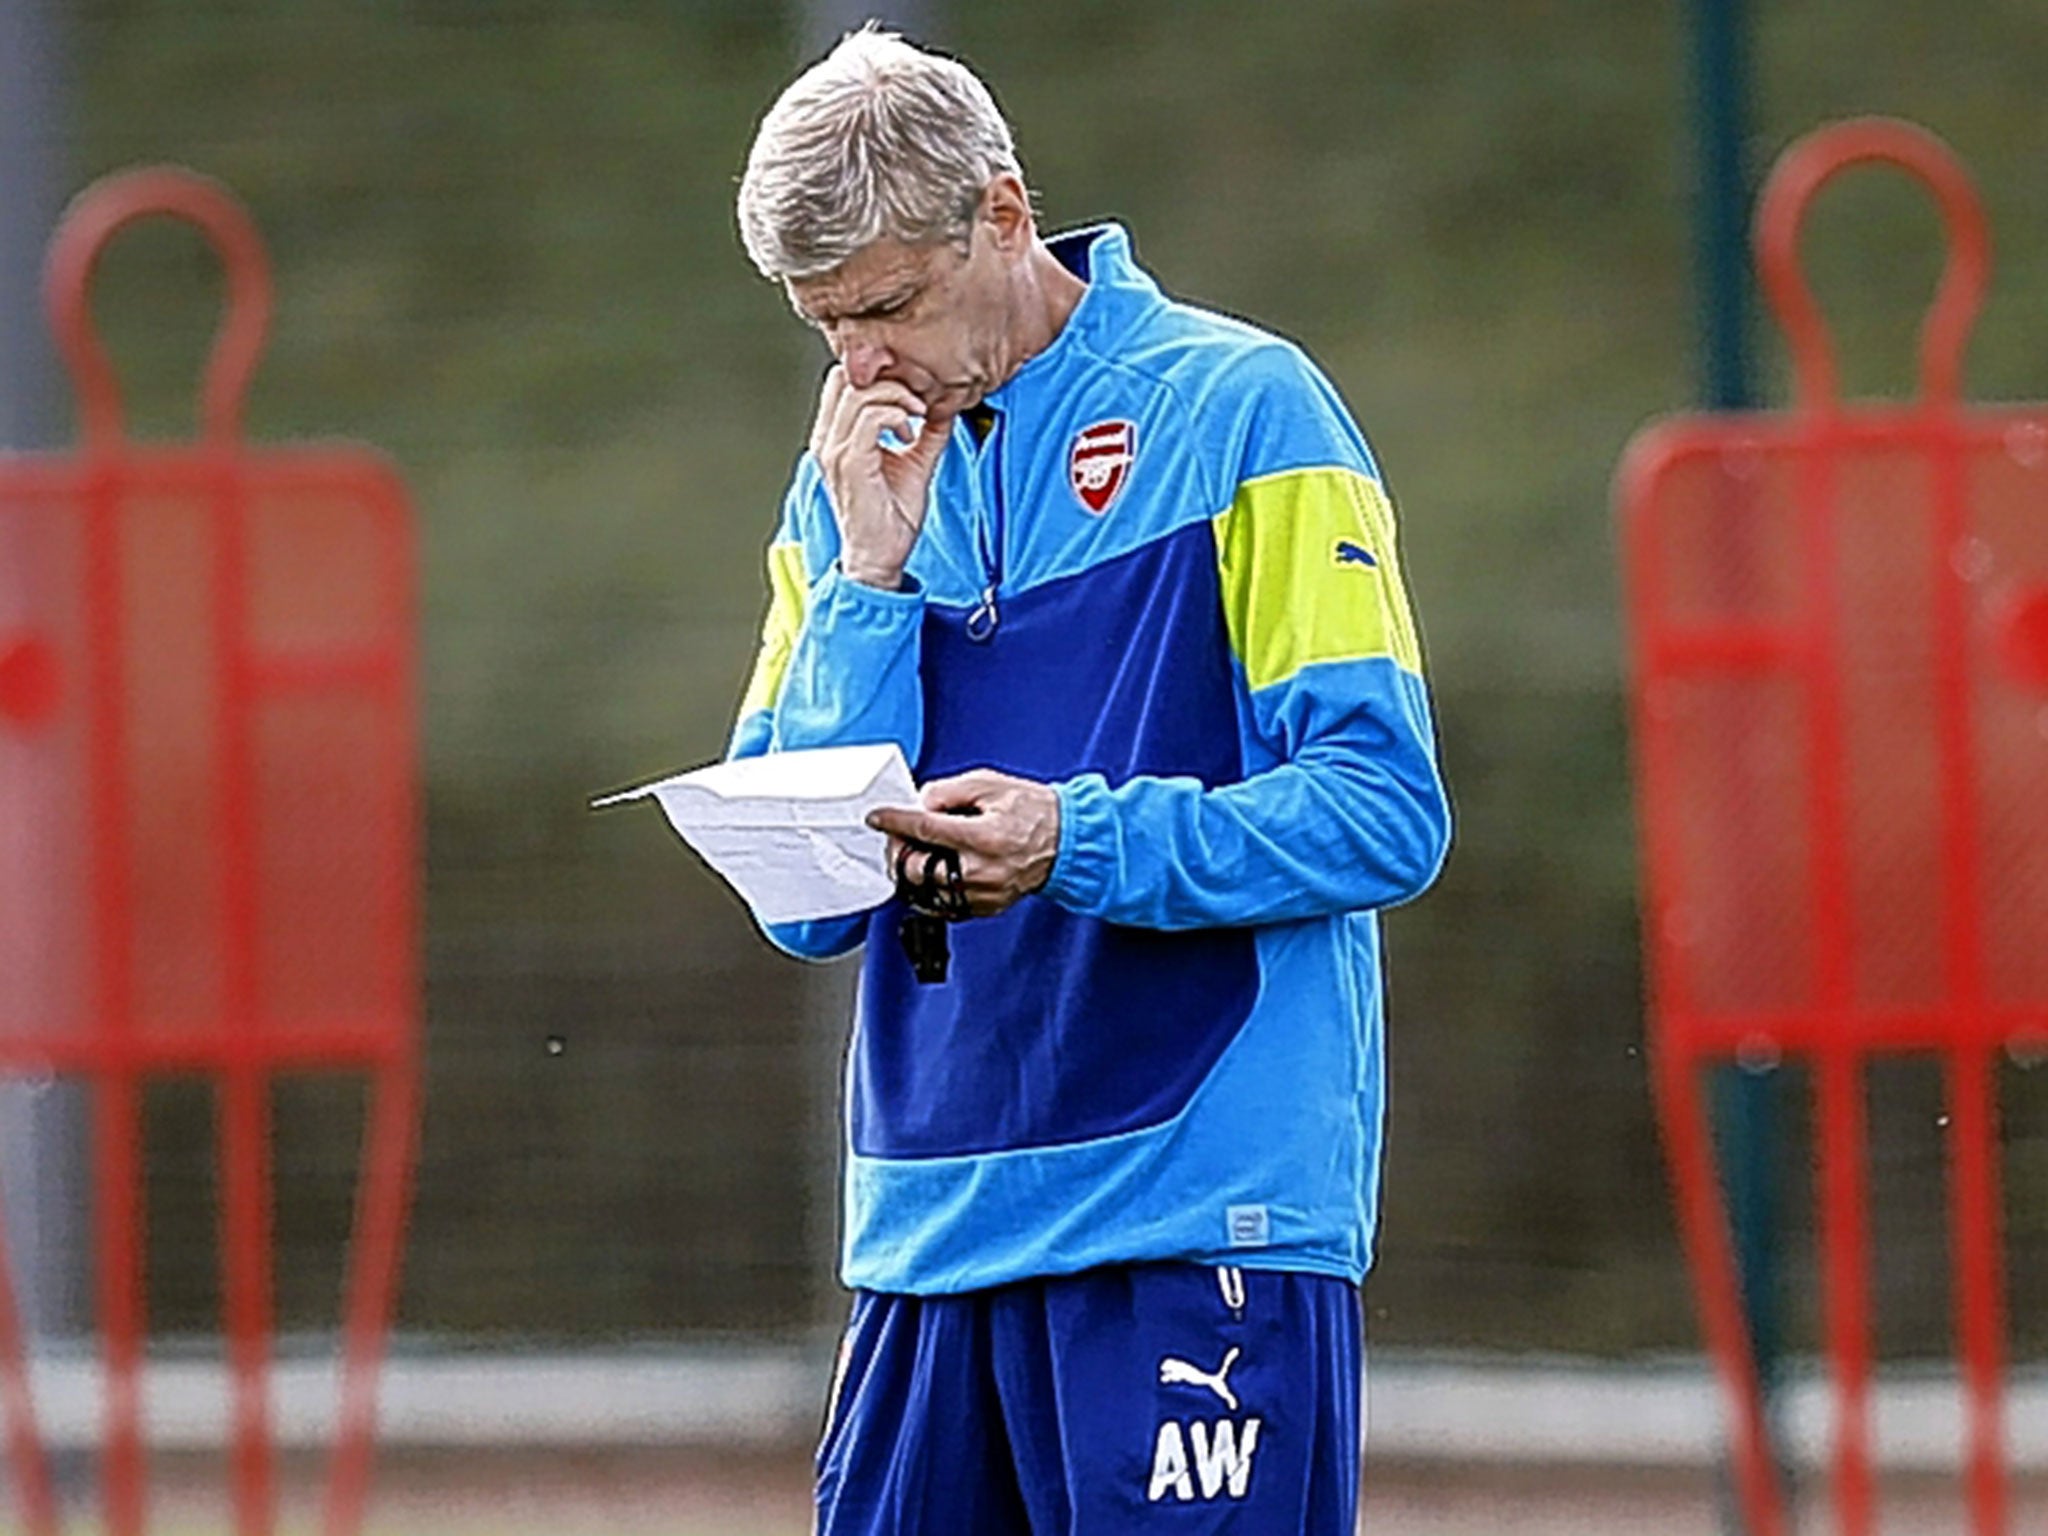 The Arsenal manager, Arsène Wenger, in pensive mood today, ahead of his side’s Champions League game in Dortmund tomorrow